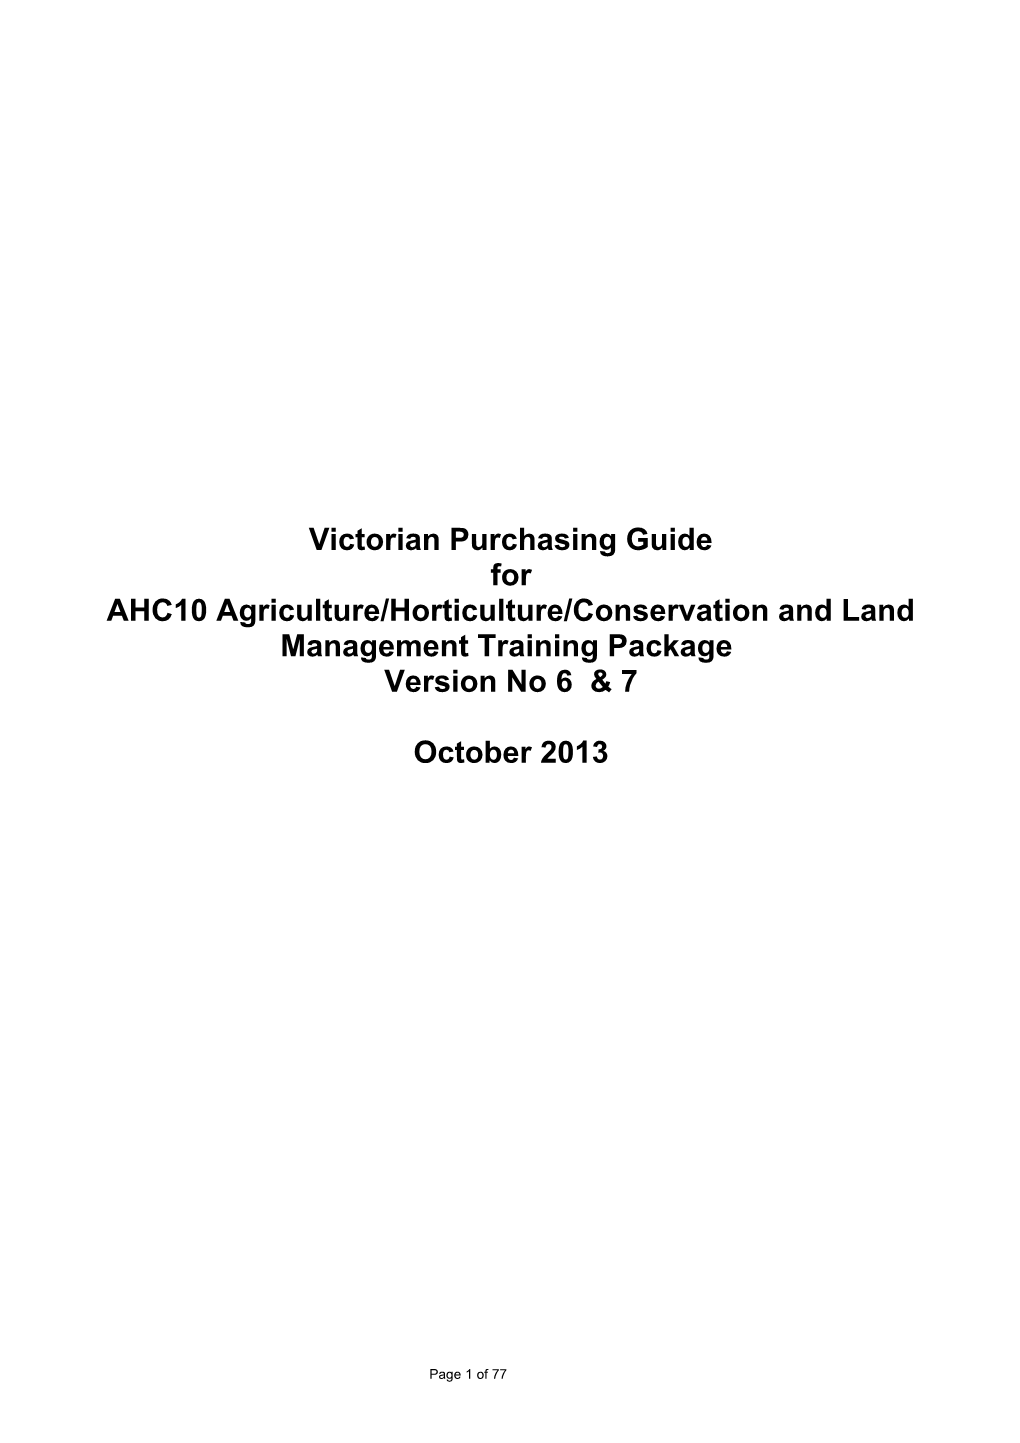 Victorian Purchasing Guide for AHC10 Agriculture, Horticulture, Conservation and Land Management